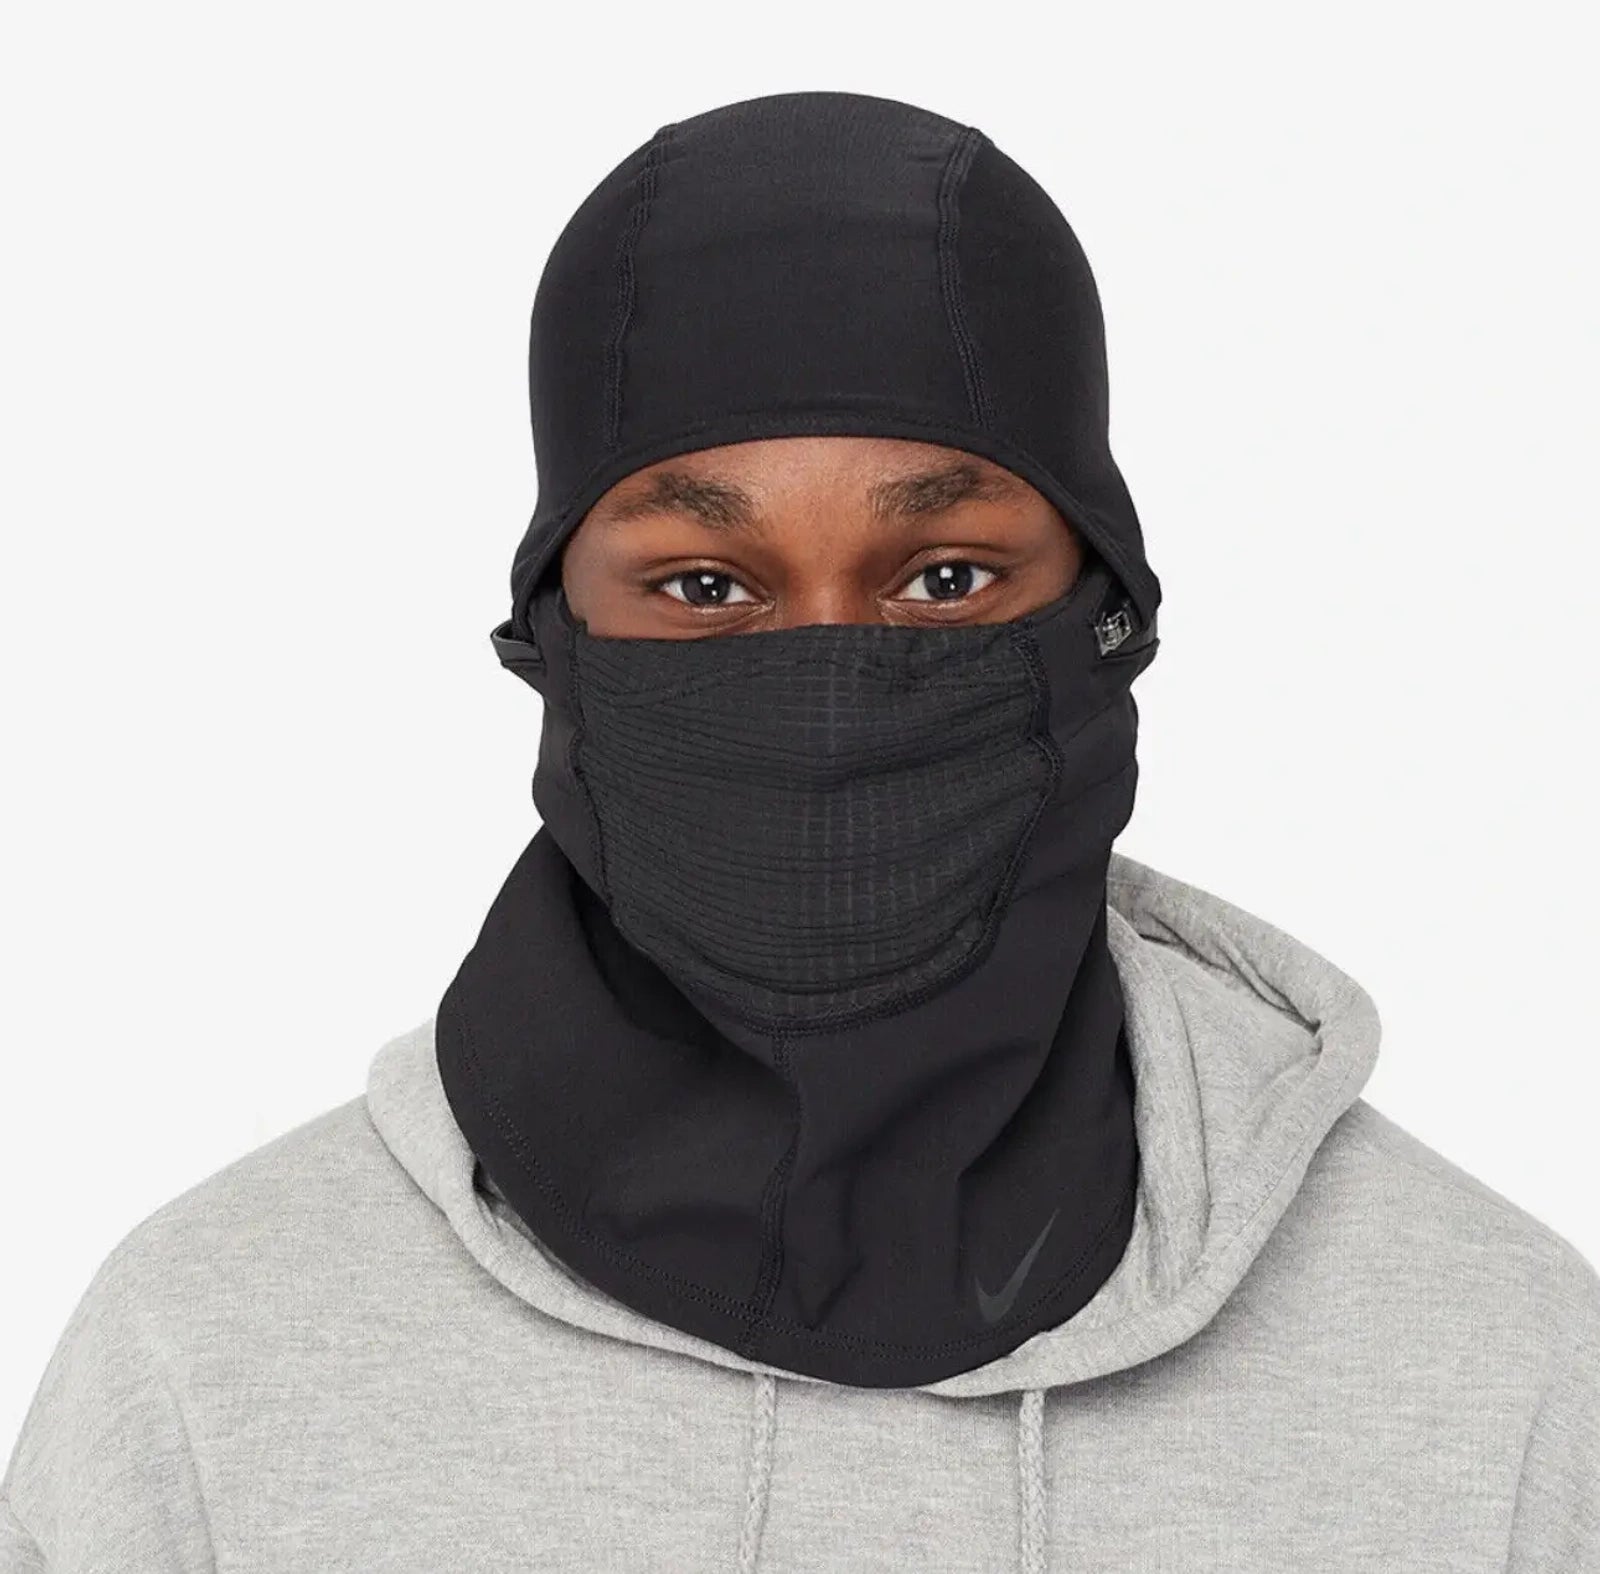 All in one , keeps face protected for cold and elements. 